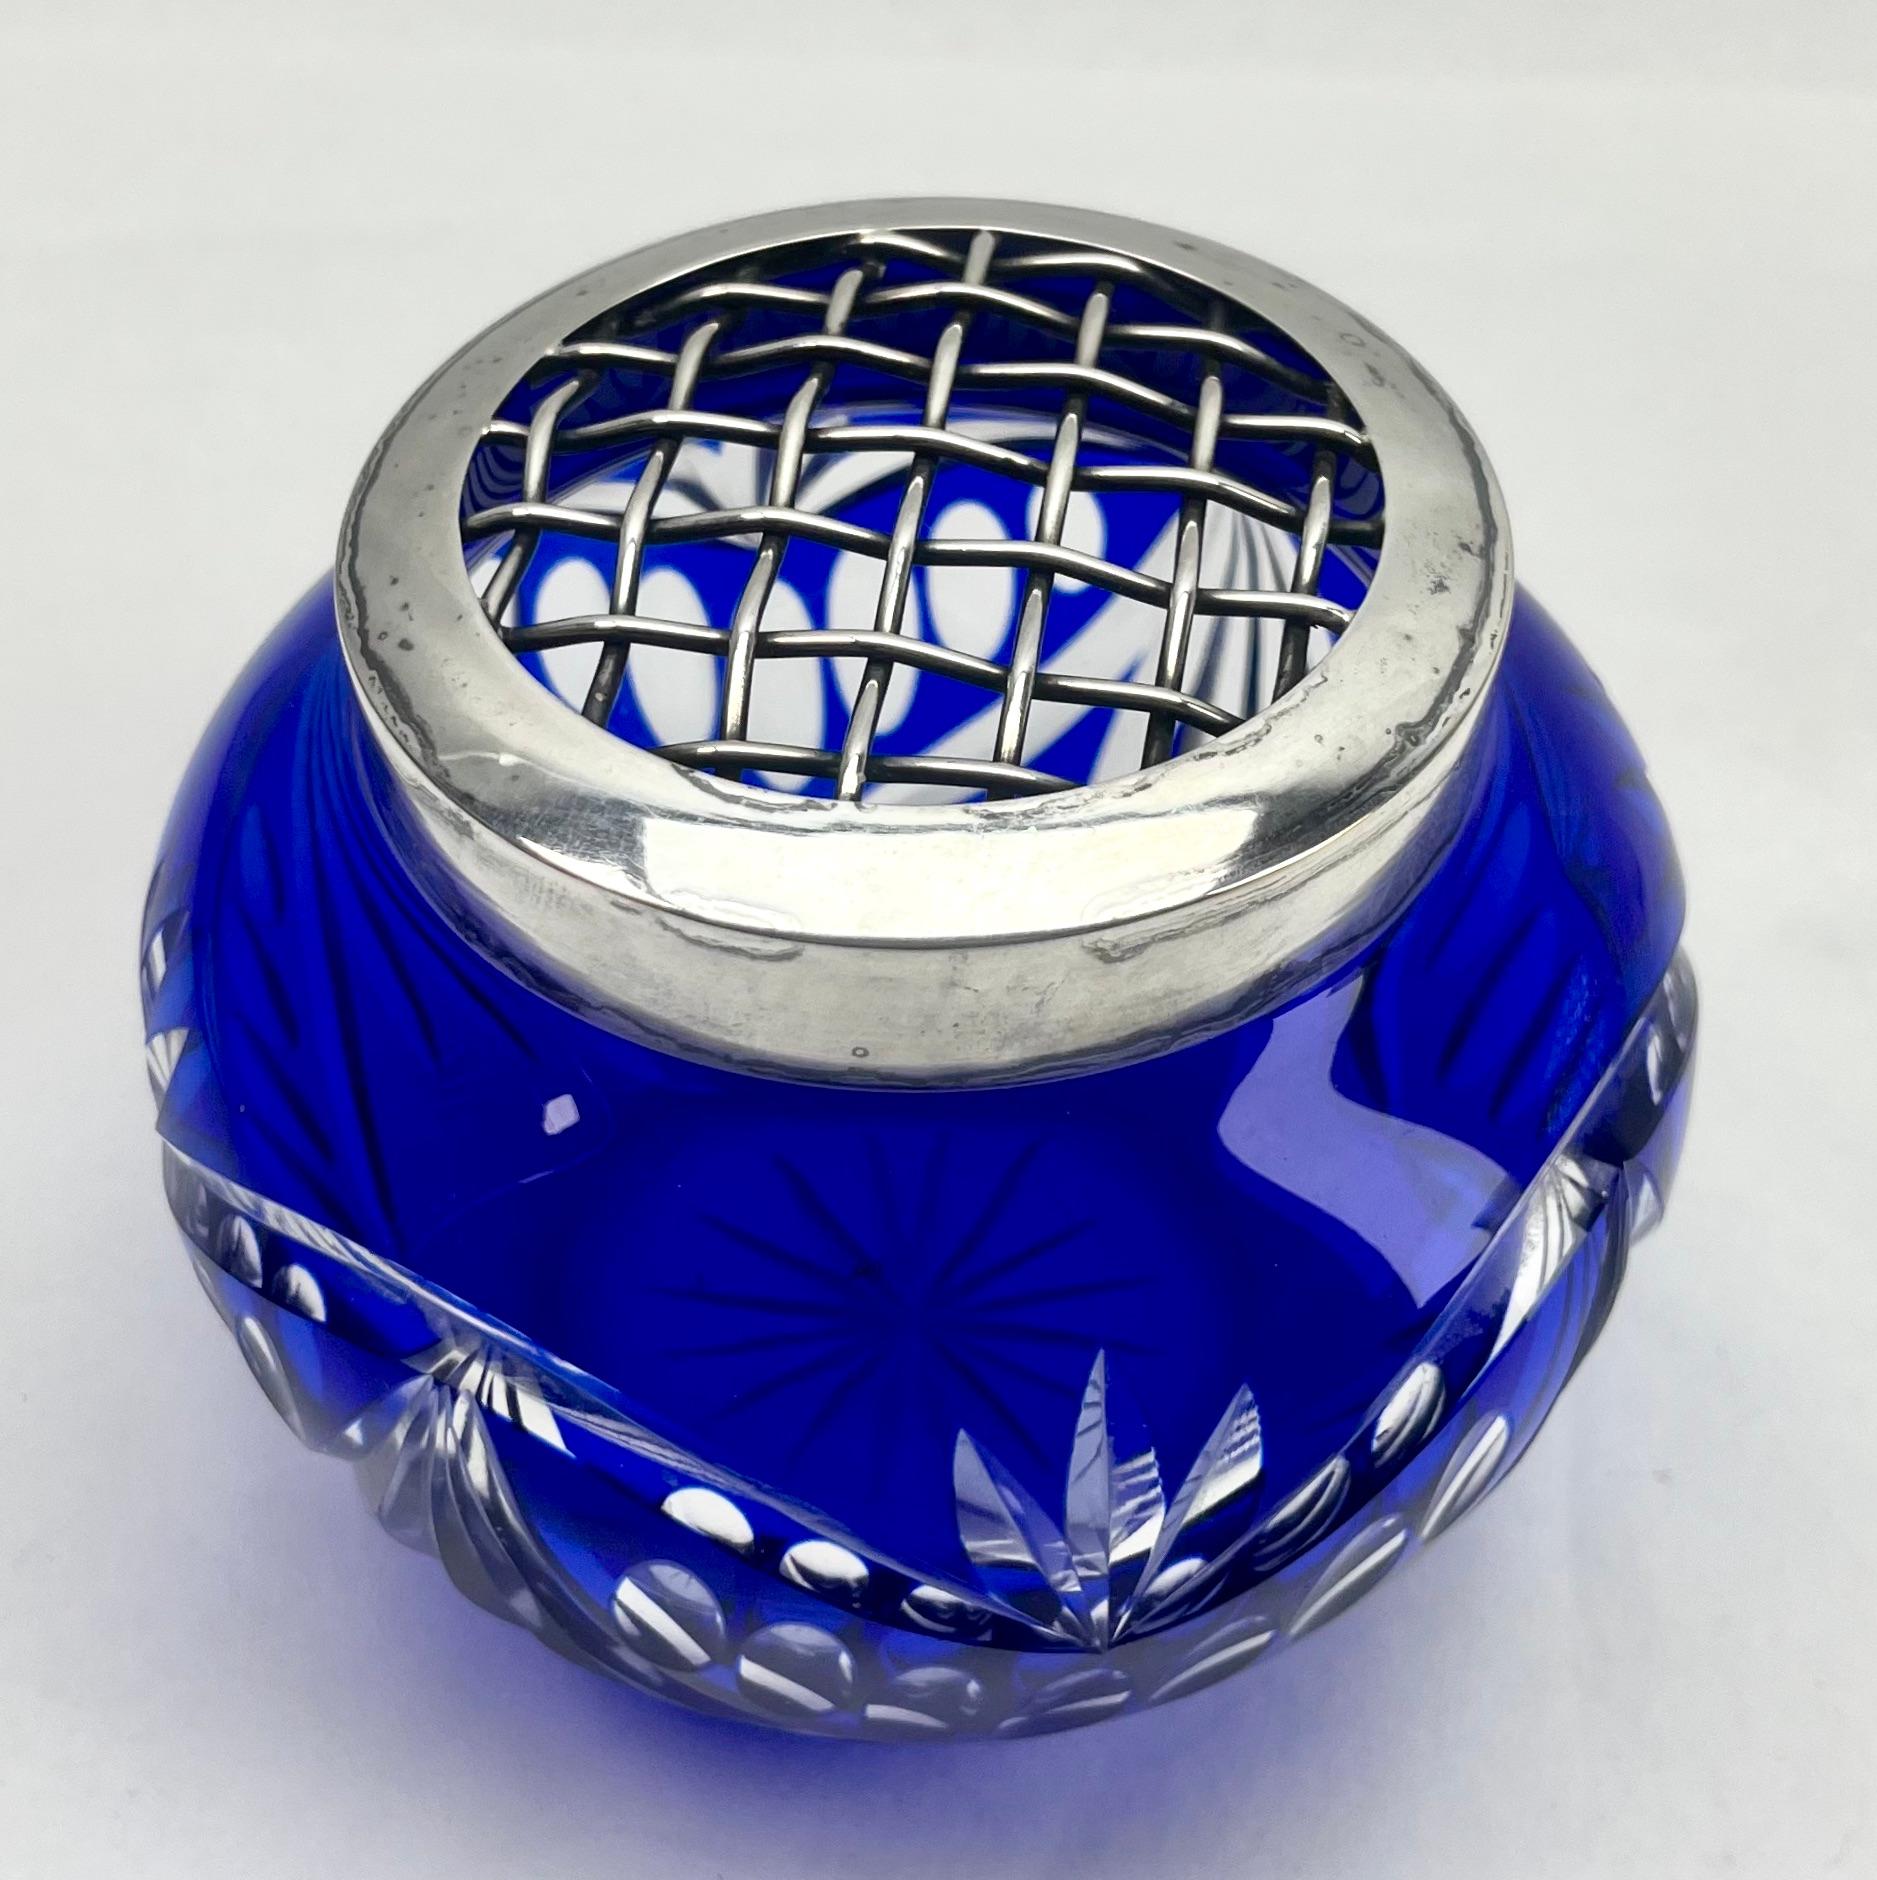 Vibrant Cobalt, cased-crystal glass large 'Pique Fleurs' vase with a cut-to-clear Art Deco decoration 
This design for vases is often called 'Pique fleurs' or 'rose-bowl' and is supplied with a fitted crystal grille to support stems in an